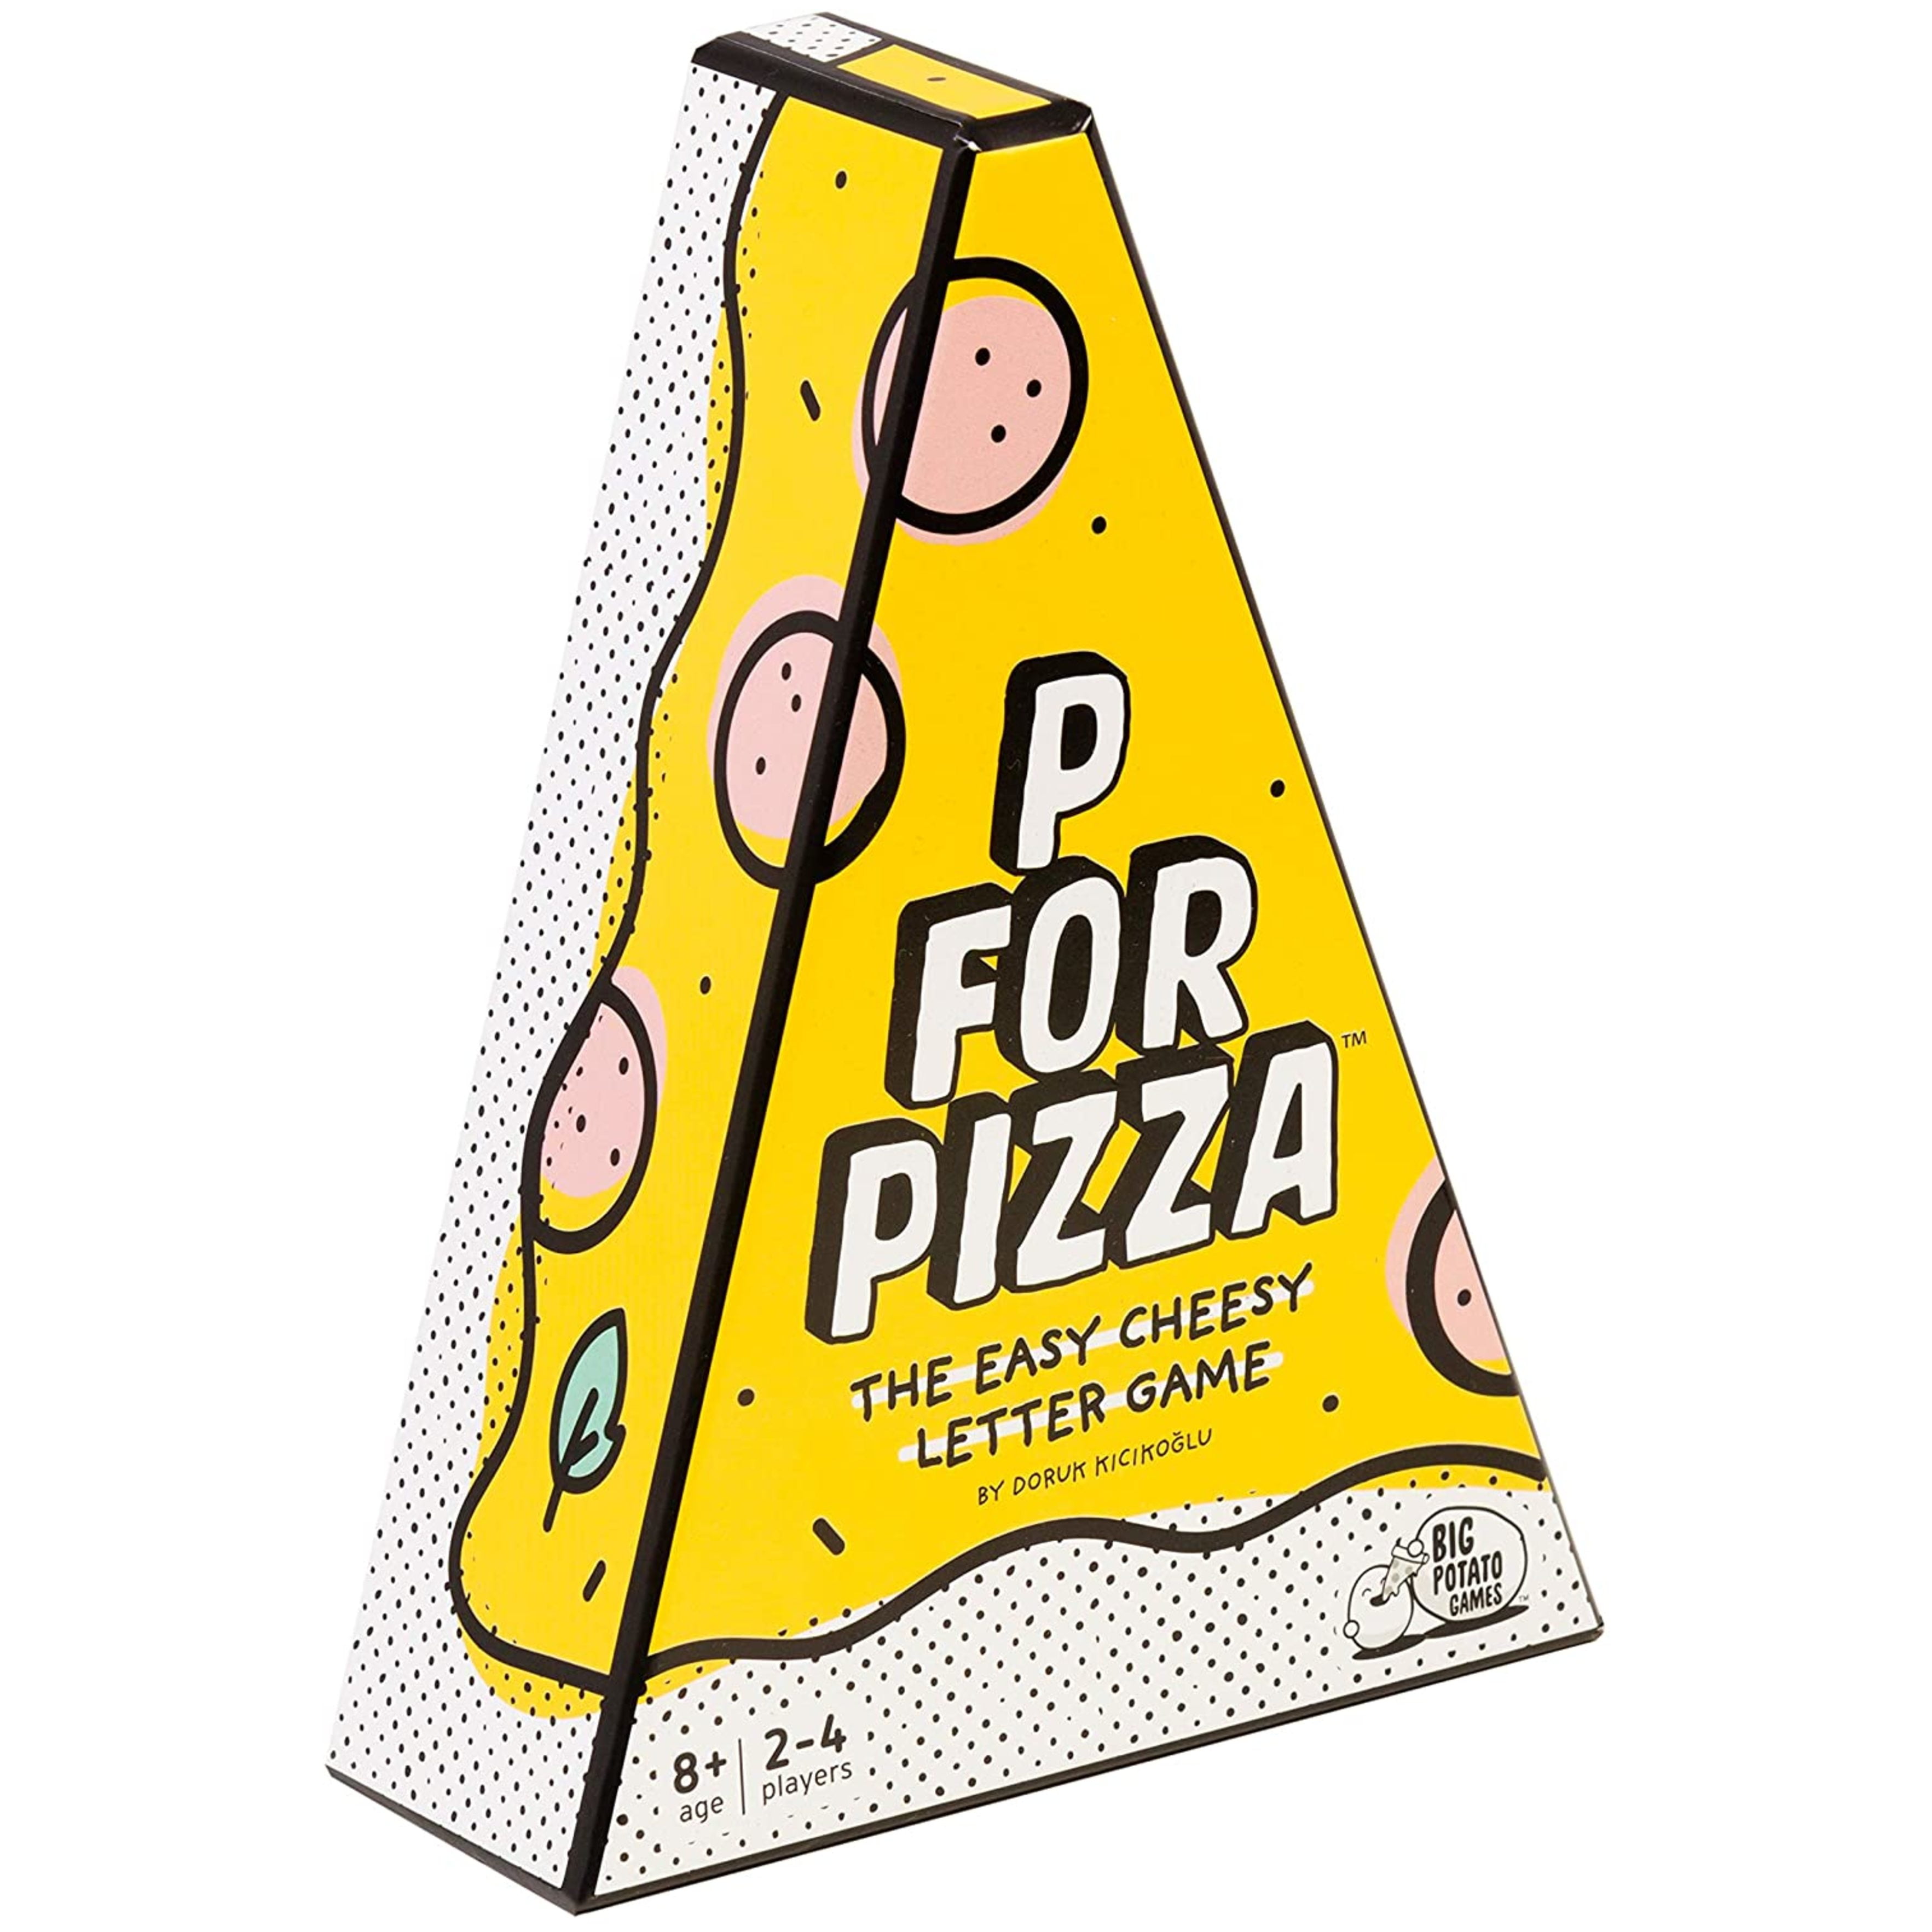 P for Pizza Freshest Board Game You'll Taste All Year, for Adults